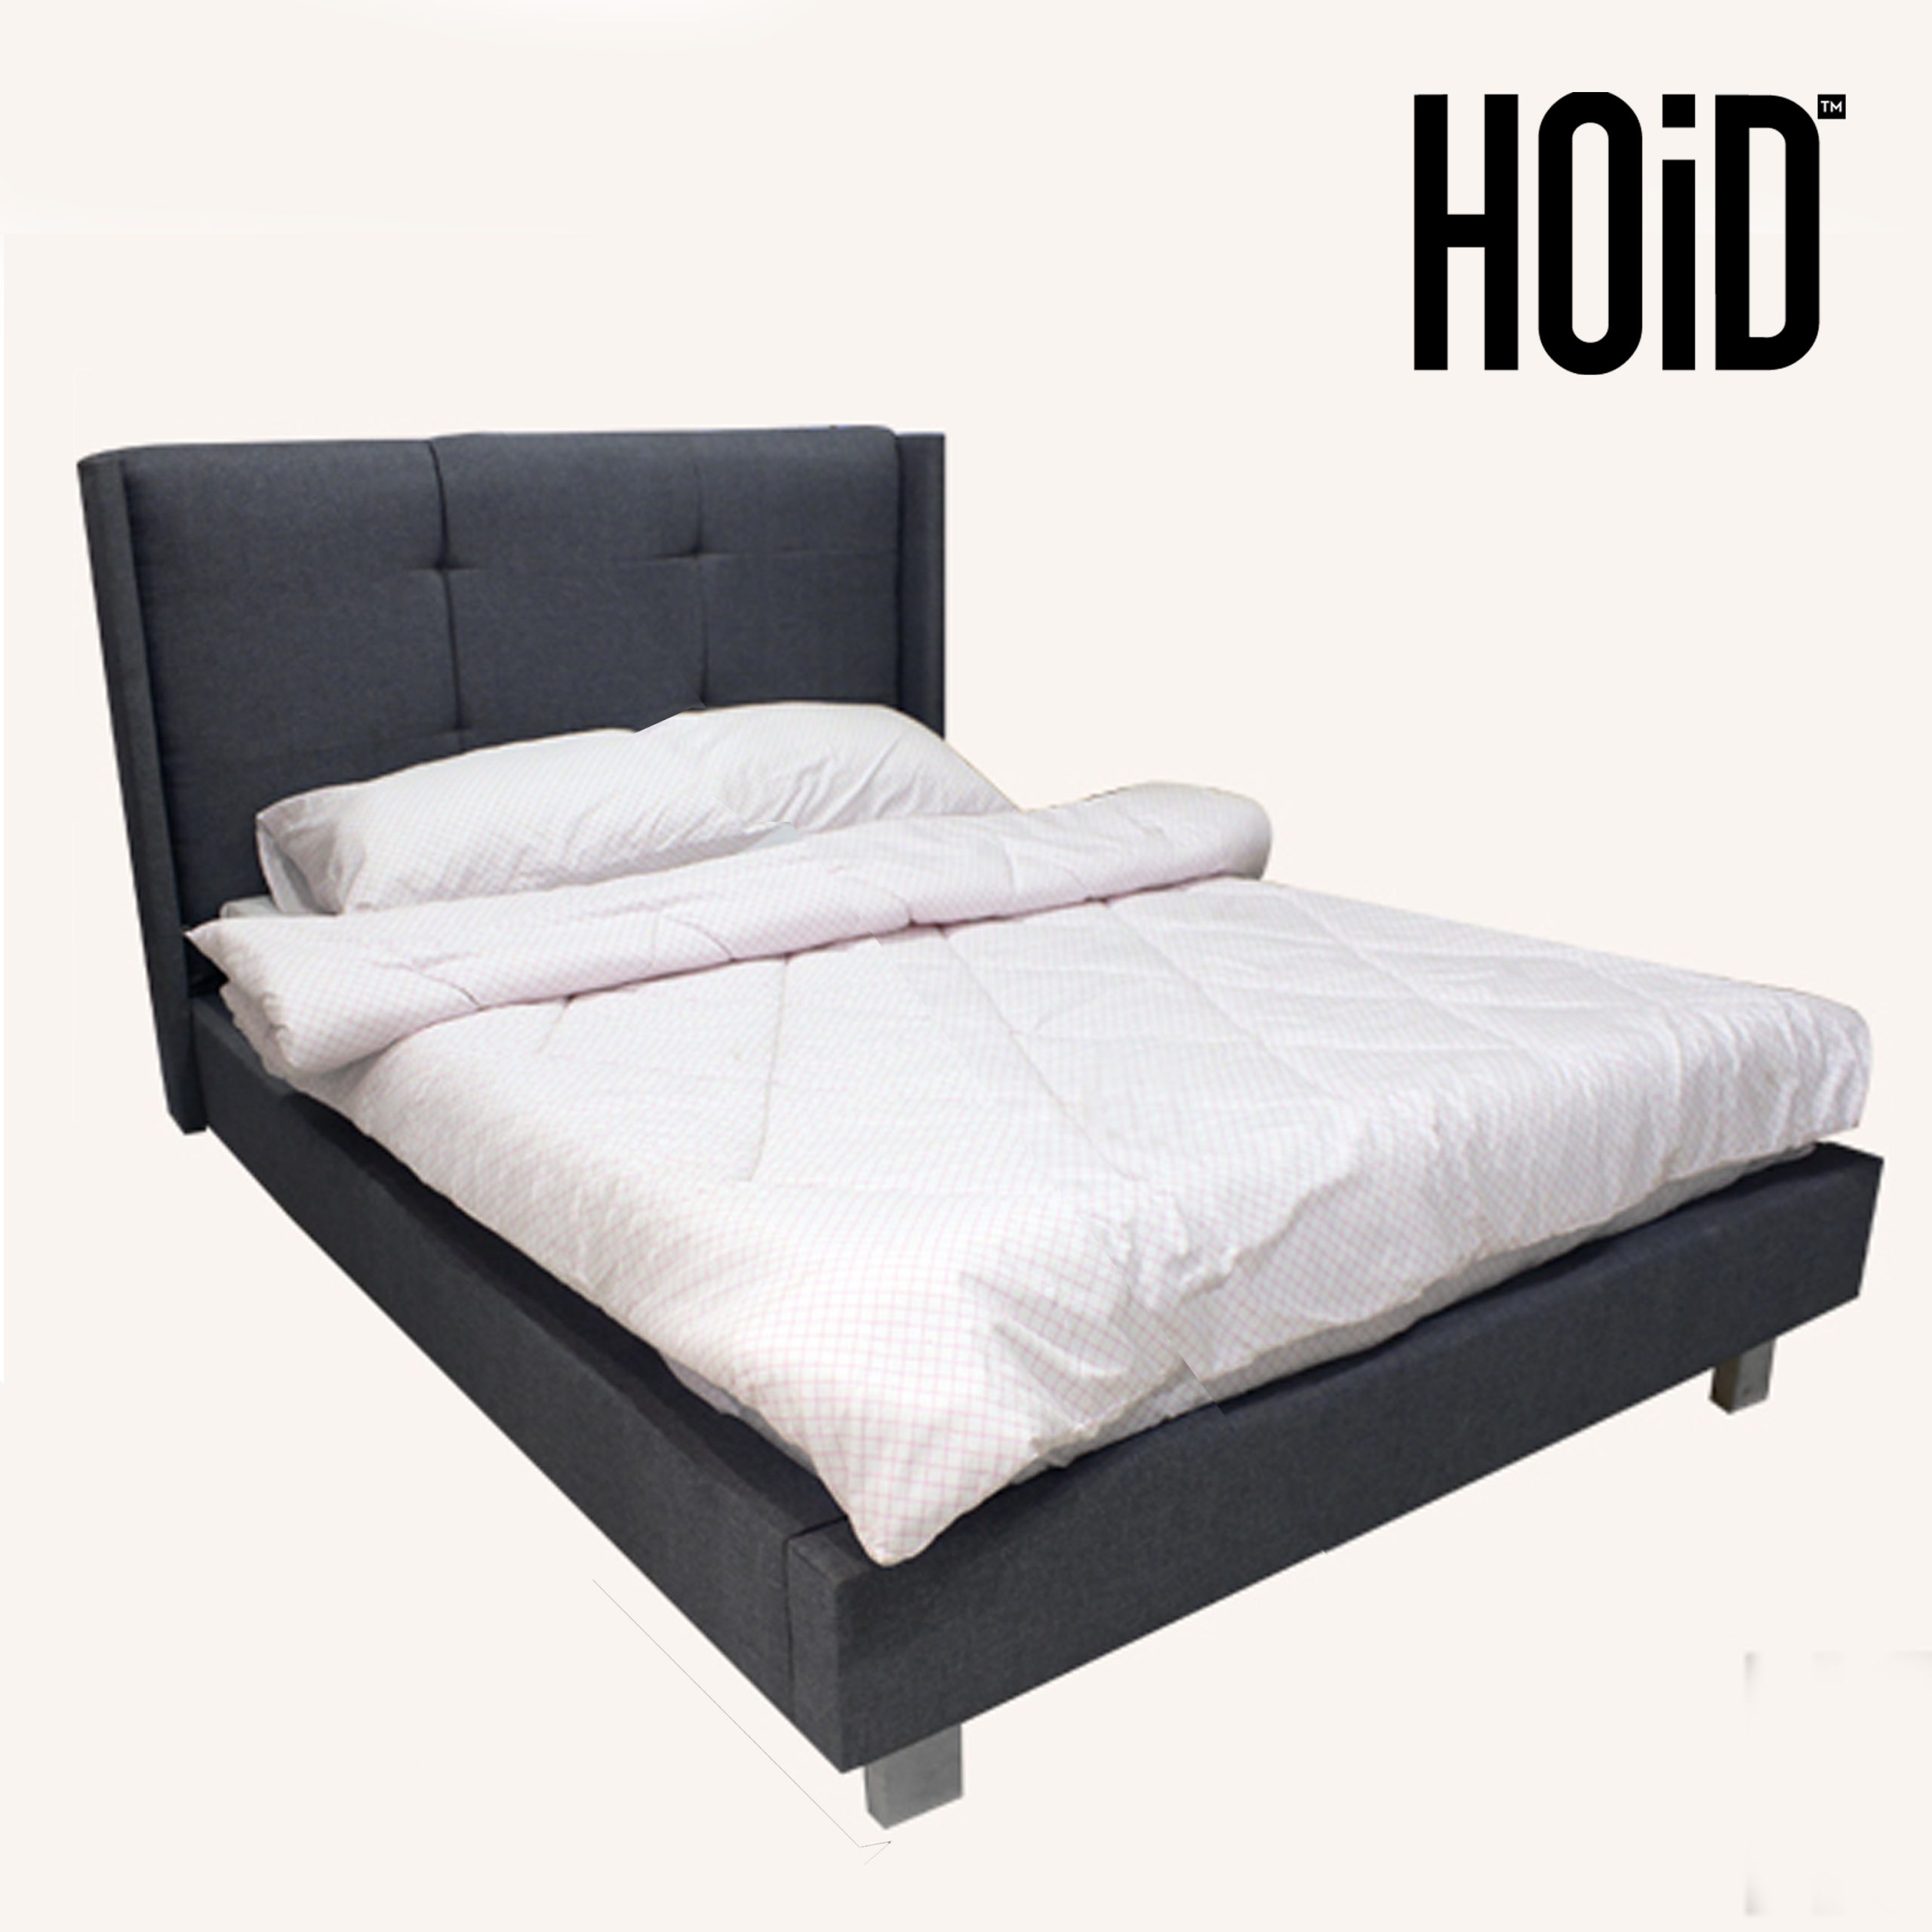 dotted-single-bed-scaled-2.jpg